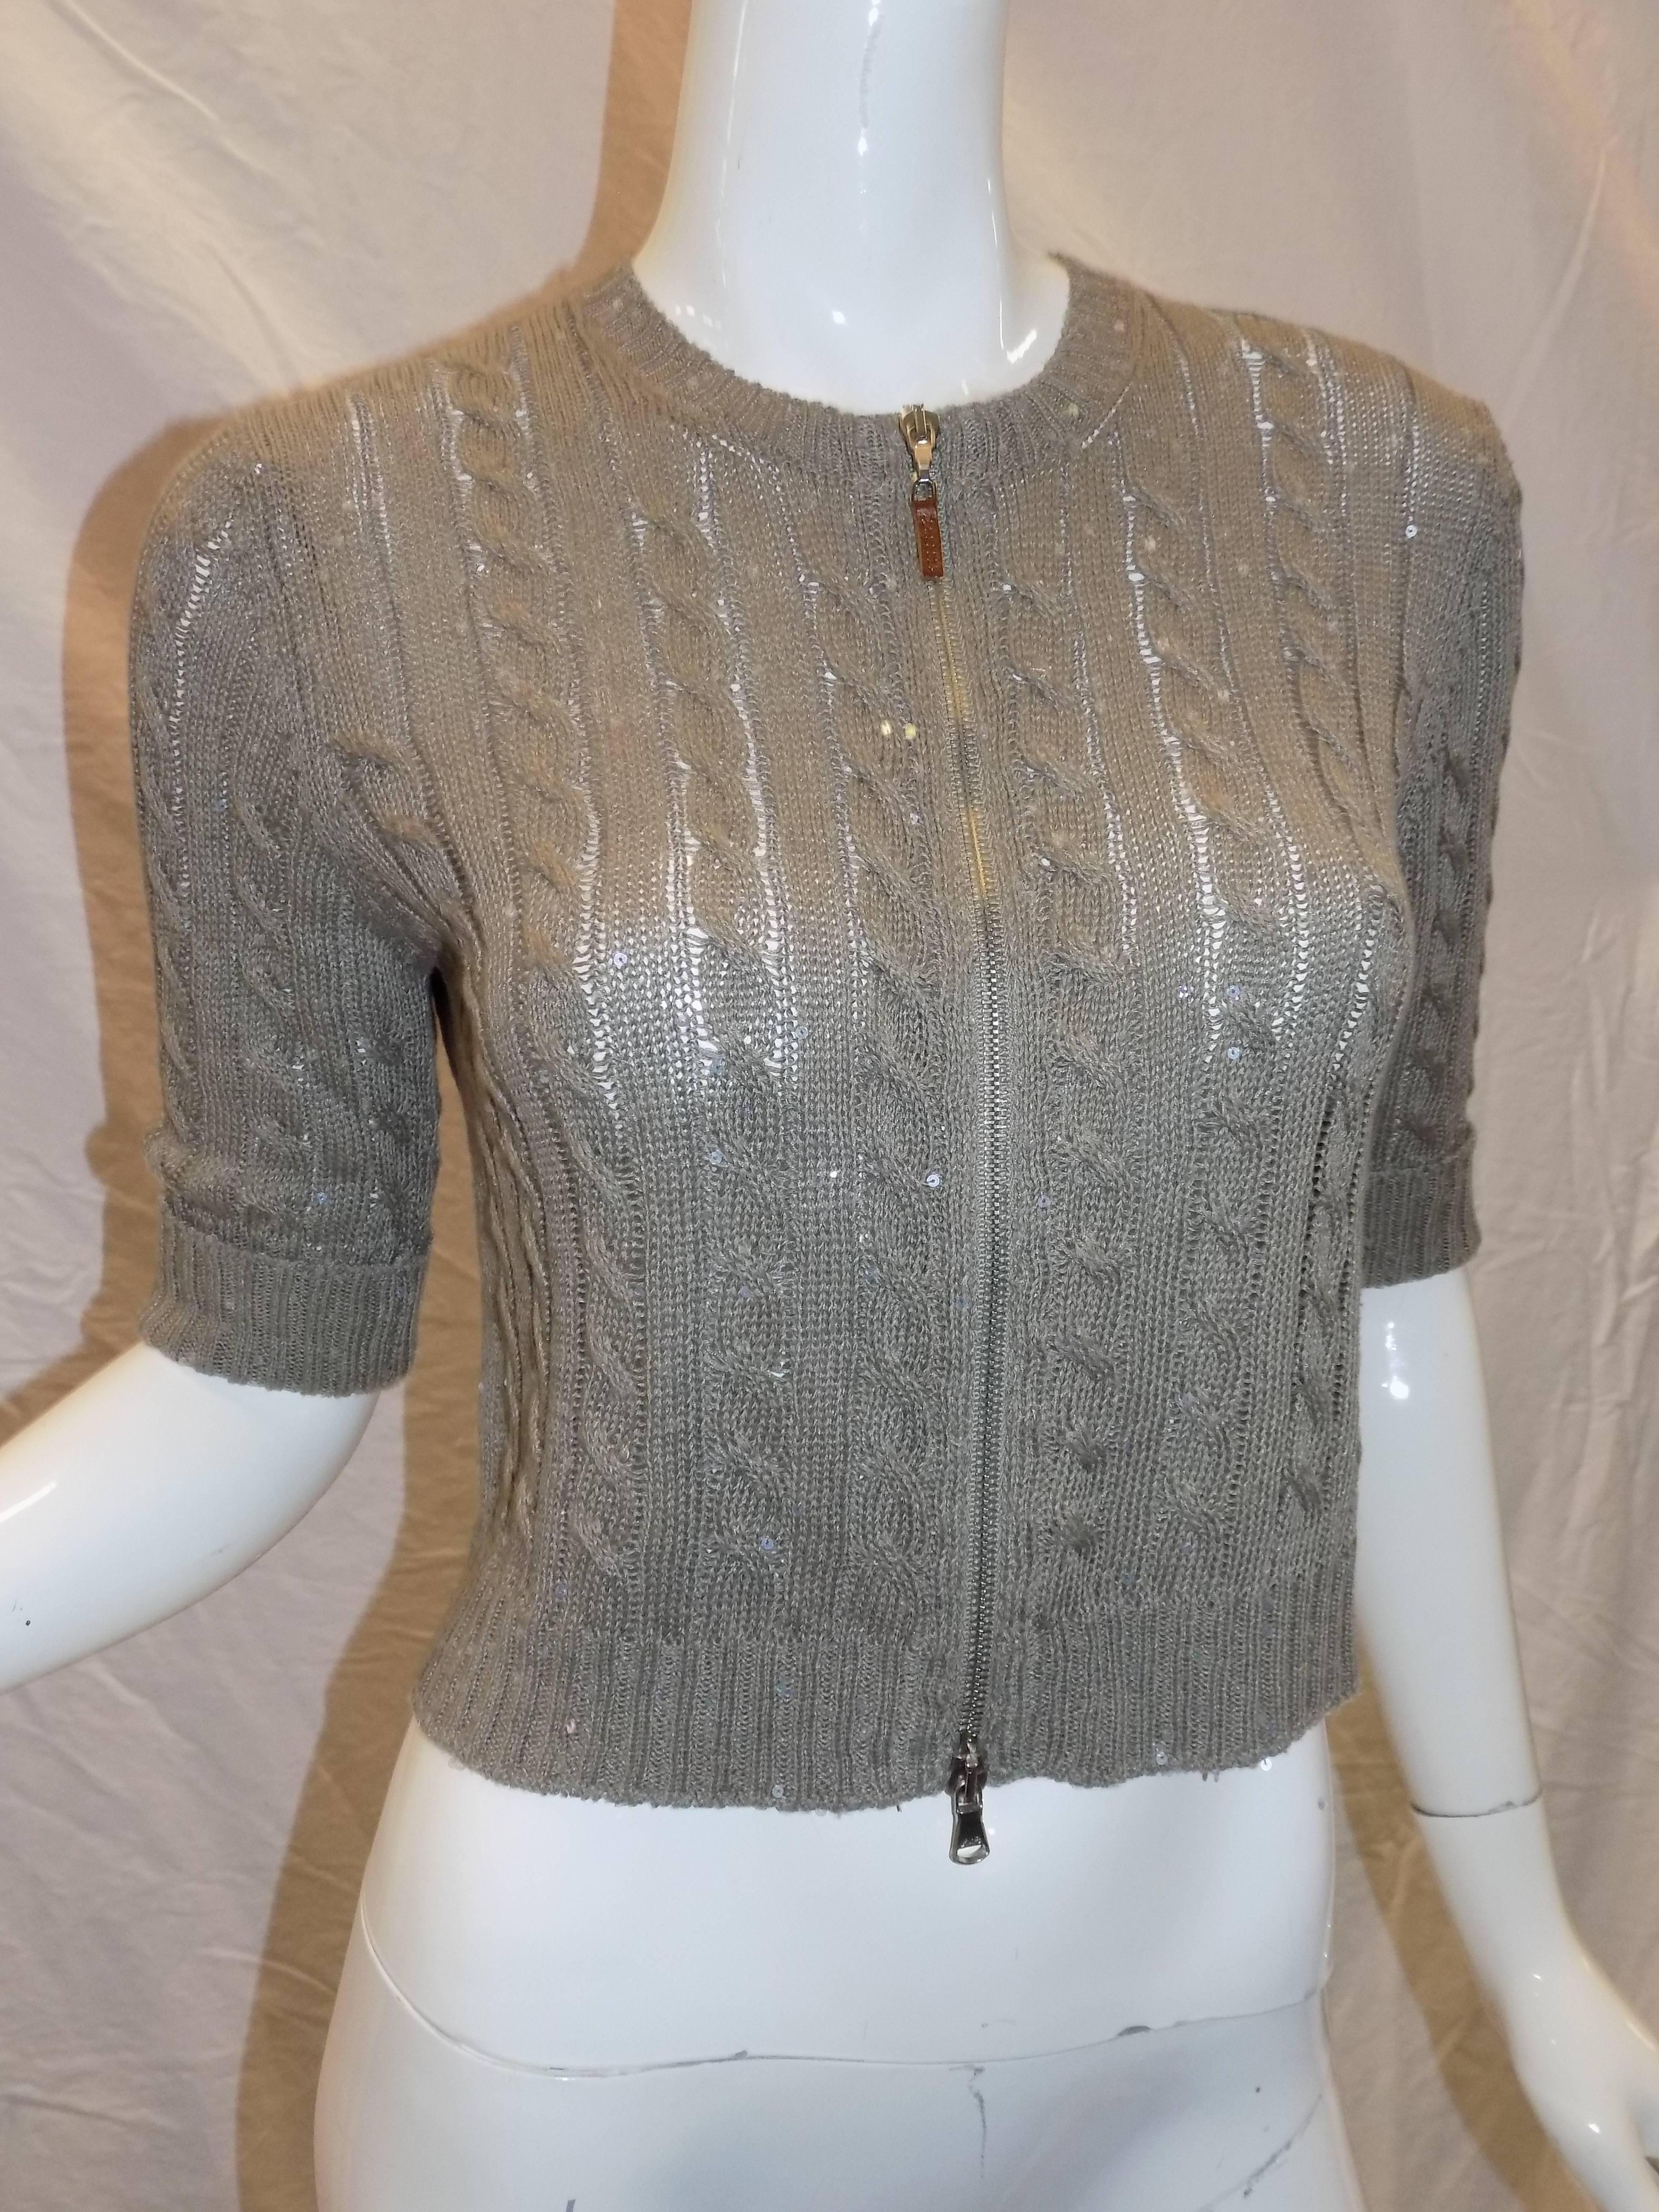 Gray Brunello Cucinelli cable Knit Sequined Sweater cardigan crop top w zipper front